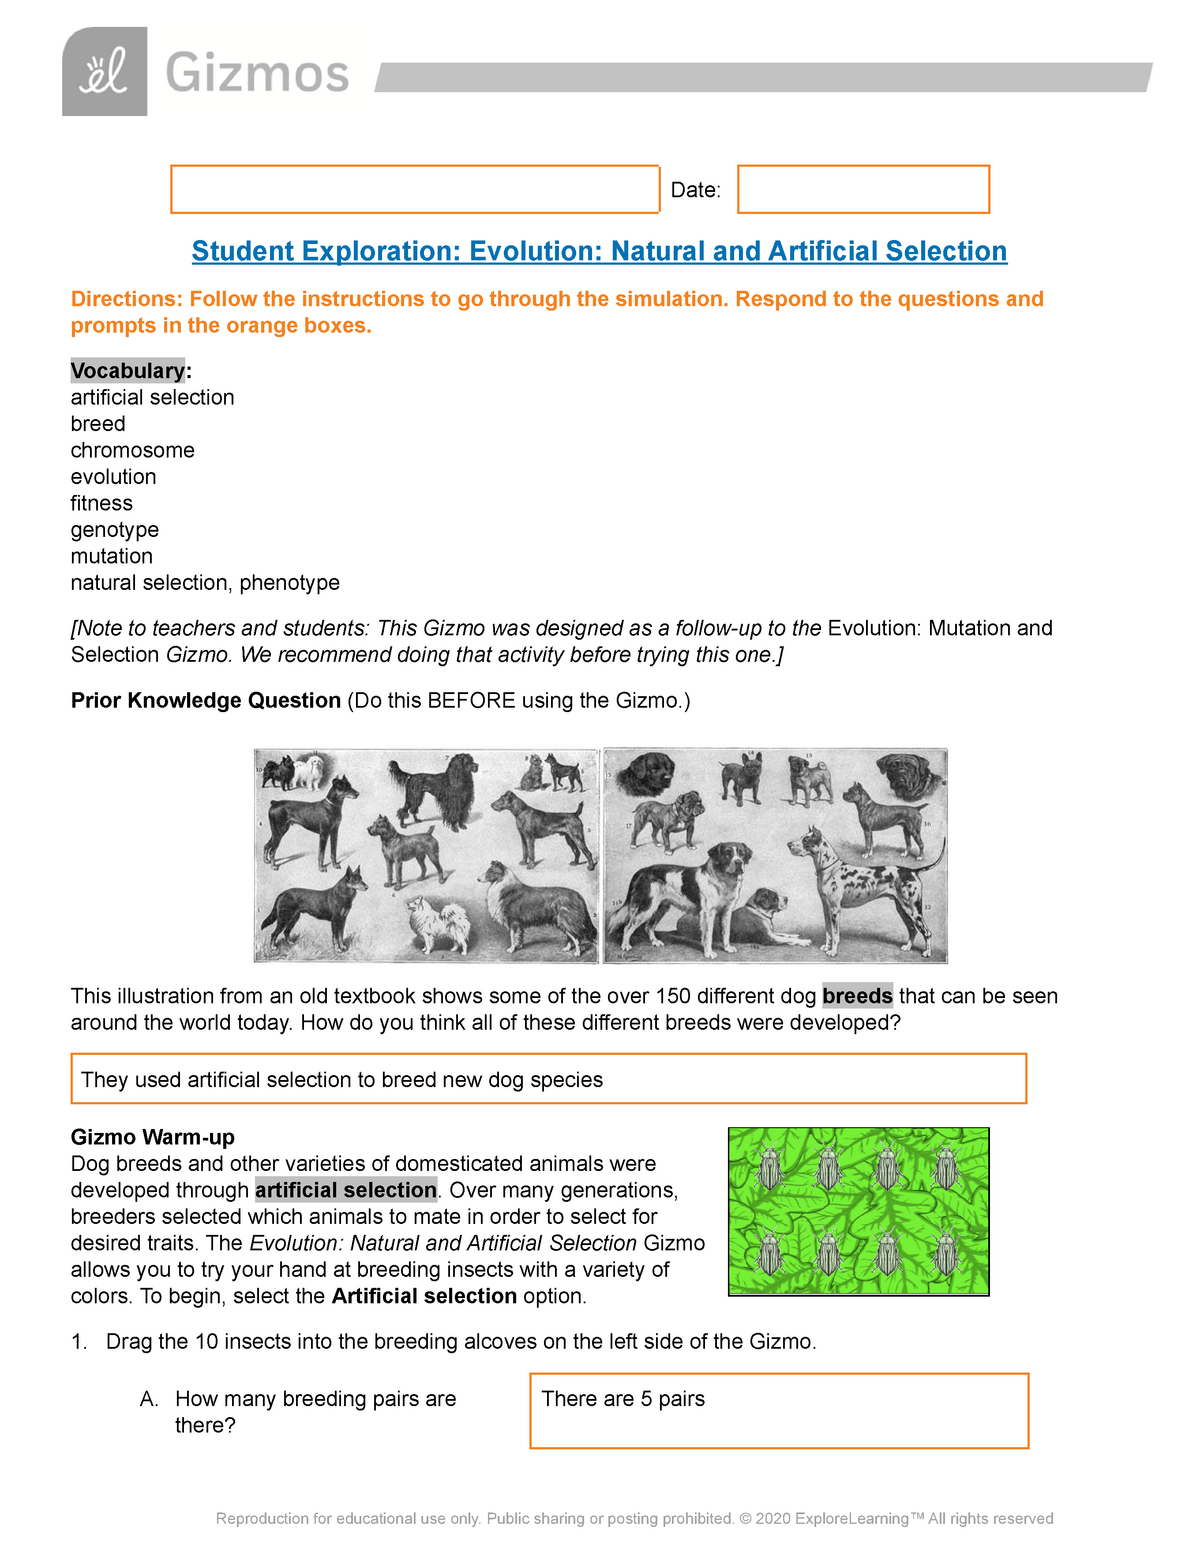 Gizmos Evolution, Natural and Artificial Selection - Biology With Regard To Evolution And Natural Selection Worksheet